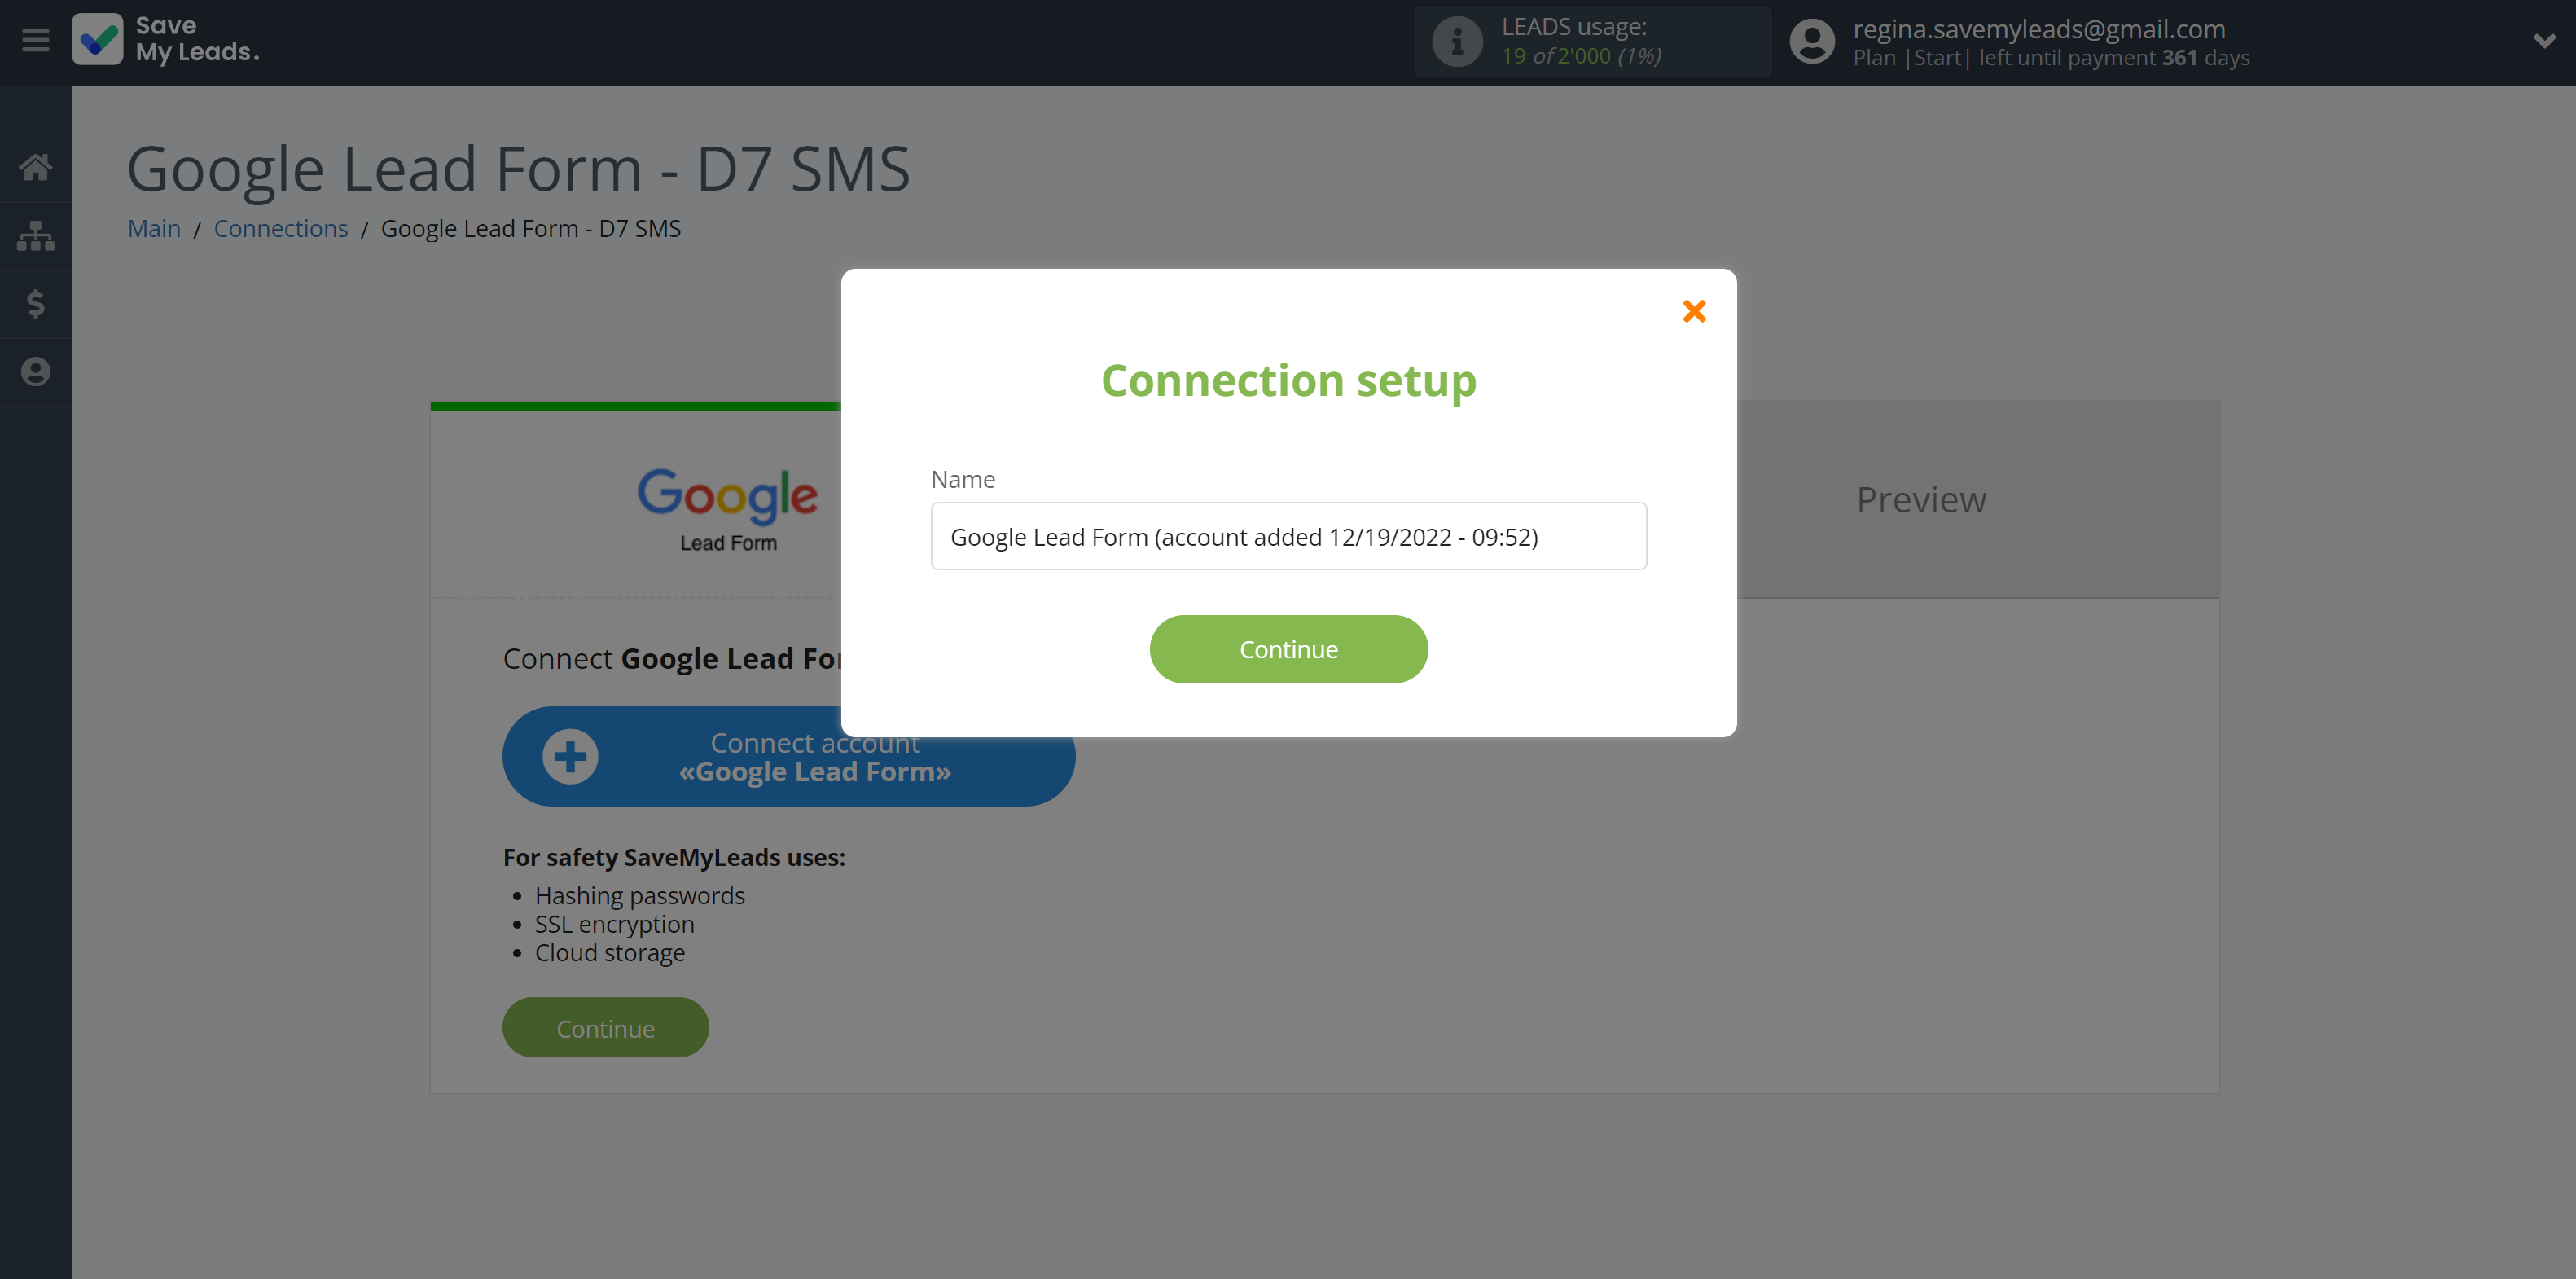 How to Connect Google Lead Form with D7 SMS | Data Source account connection